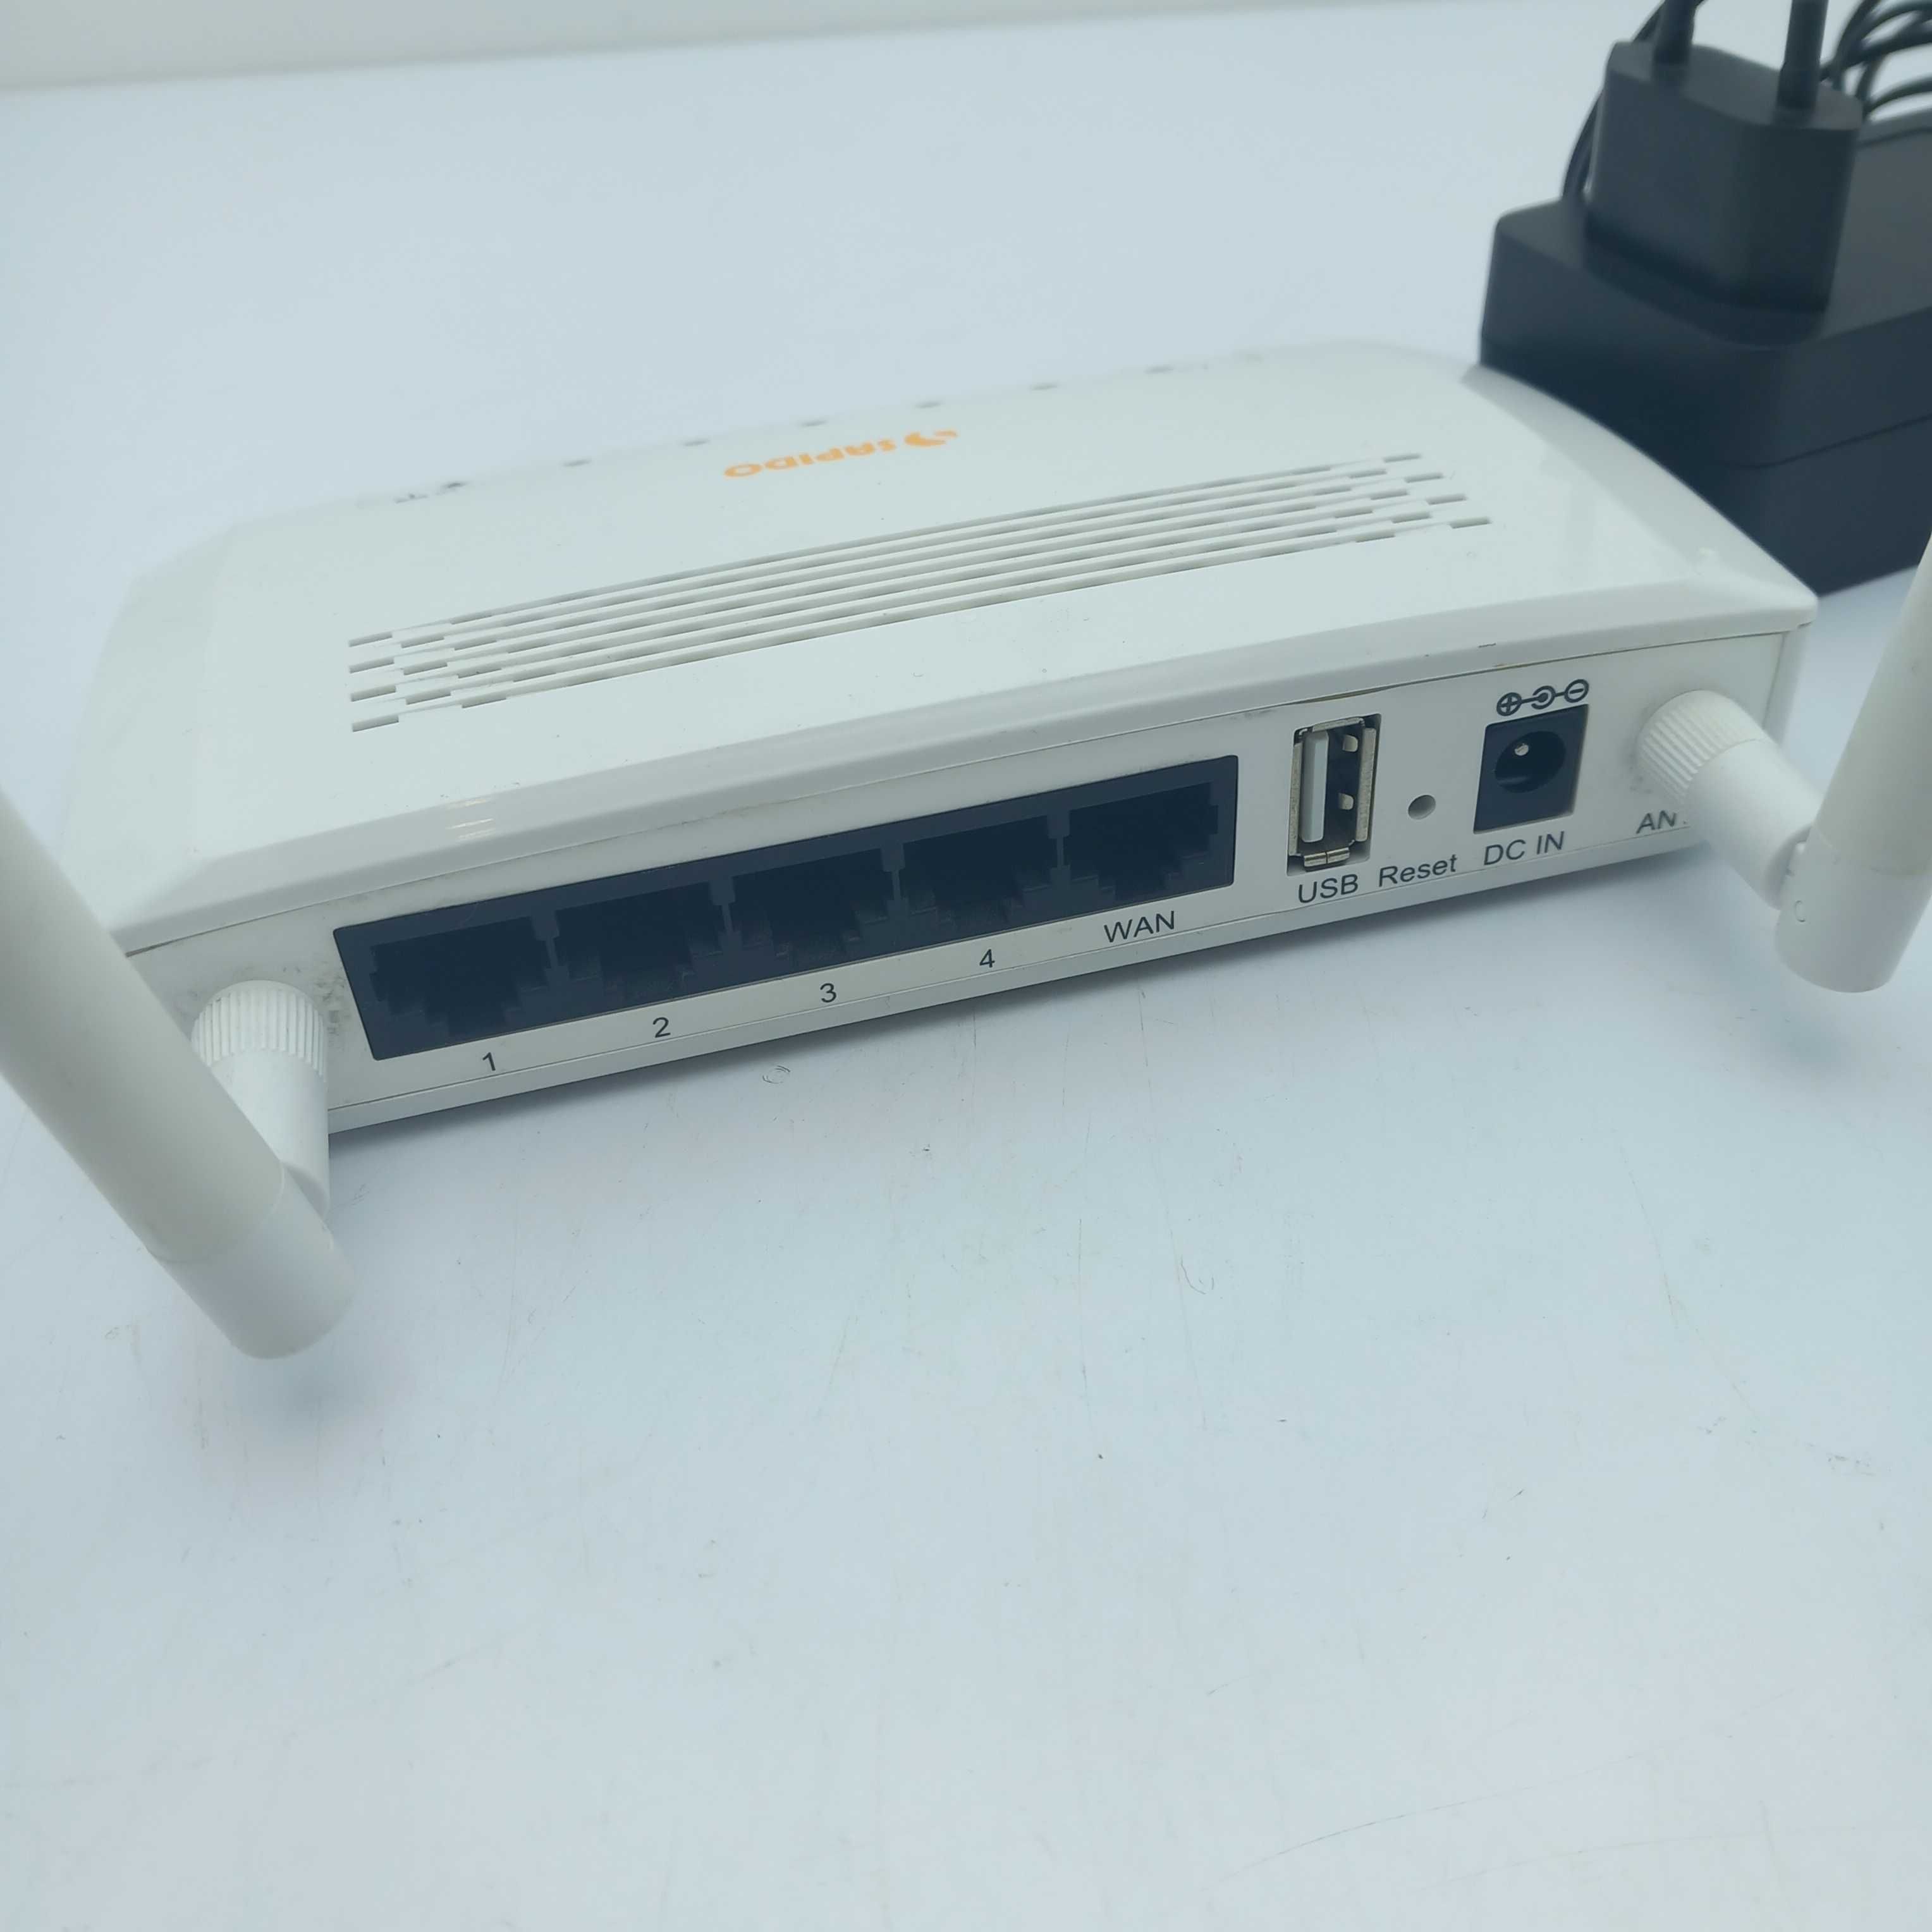 Router WiFi 3G Sapido RB-1830, 300 Mbps